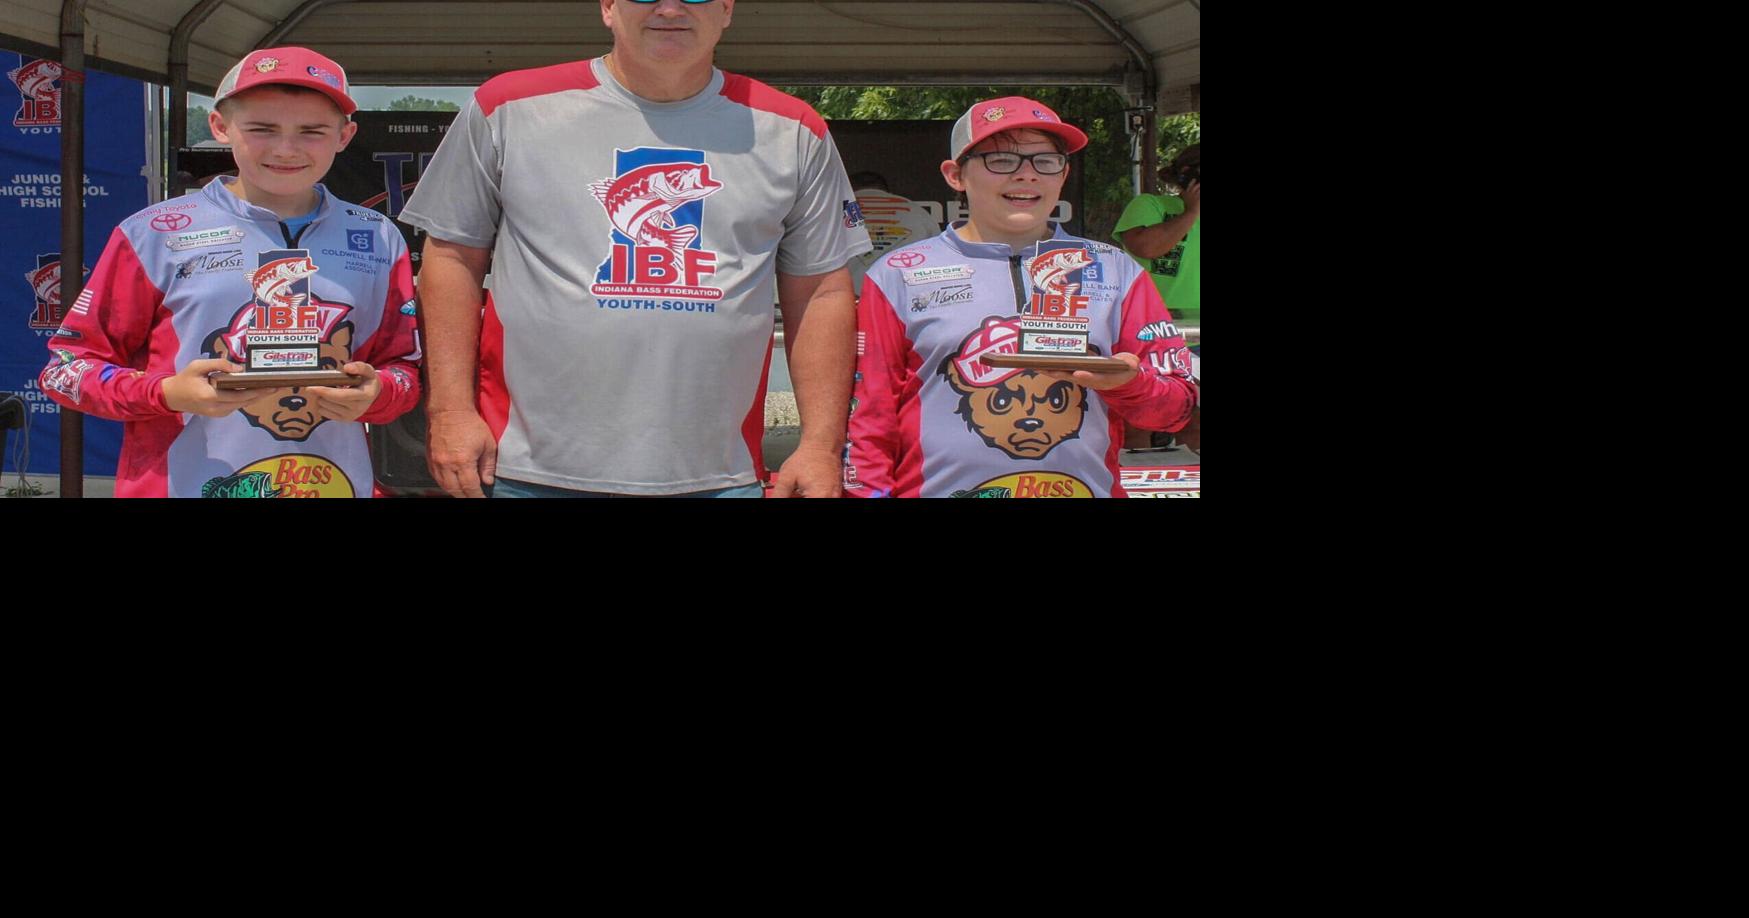 Madison bass fishing team competes in 1st tourney of the summer